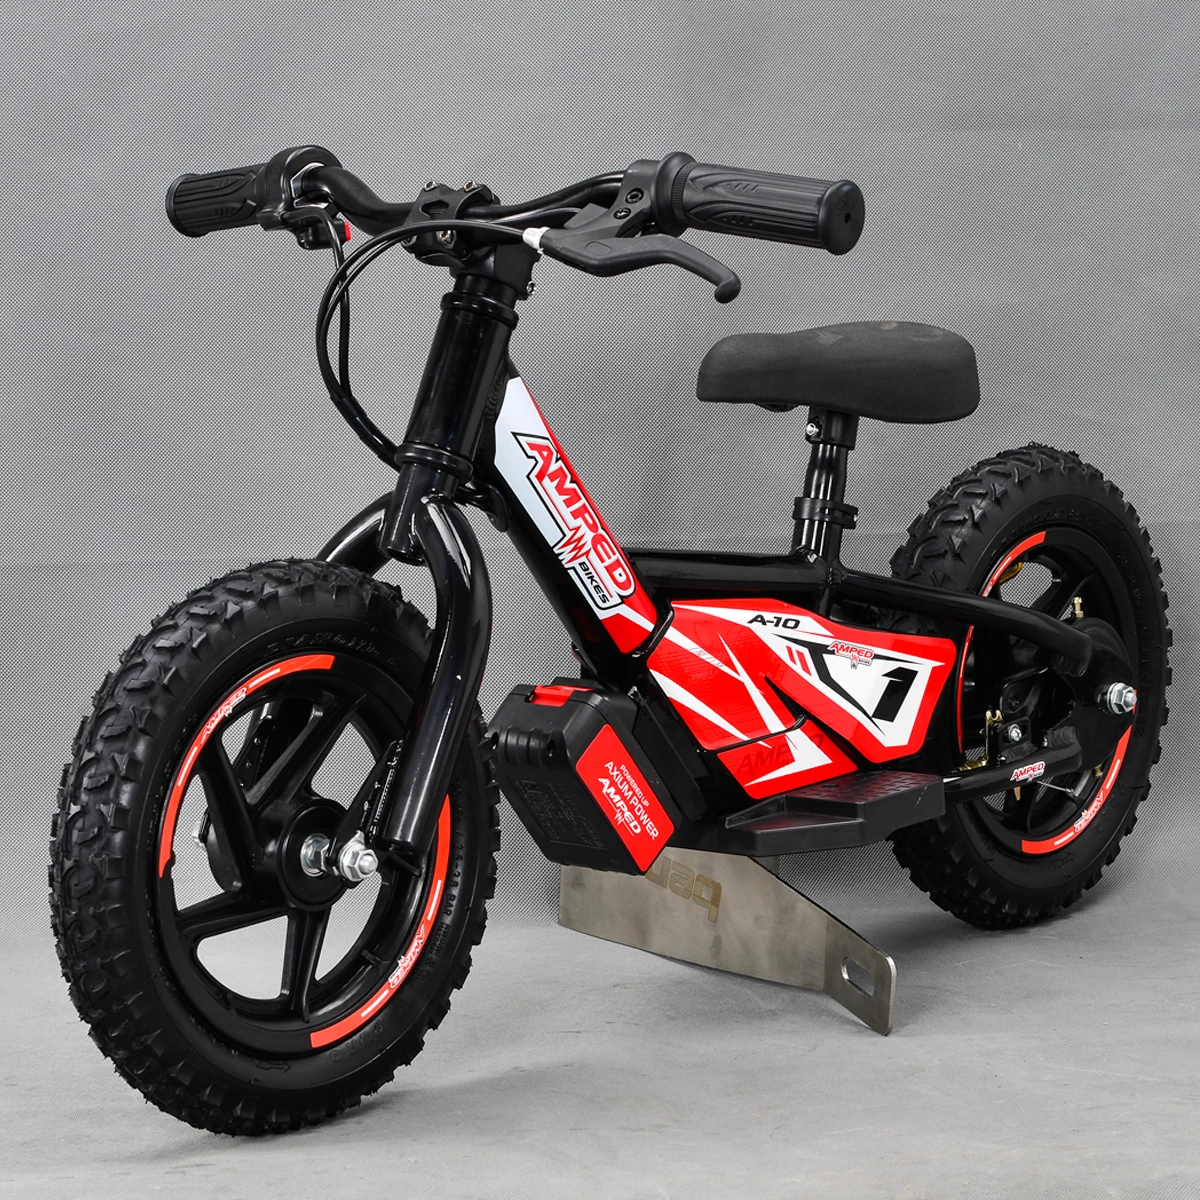 children's electric bicycle